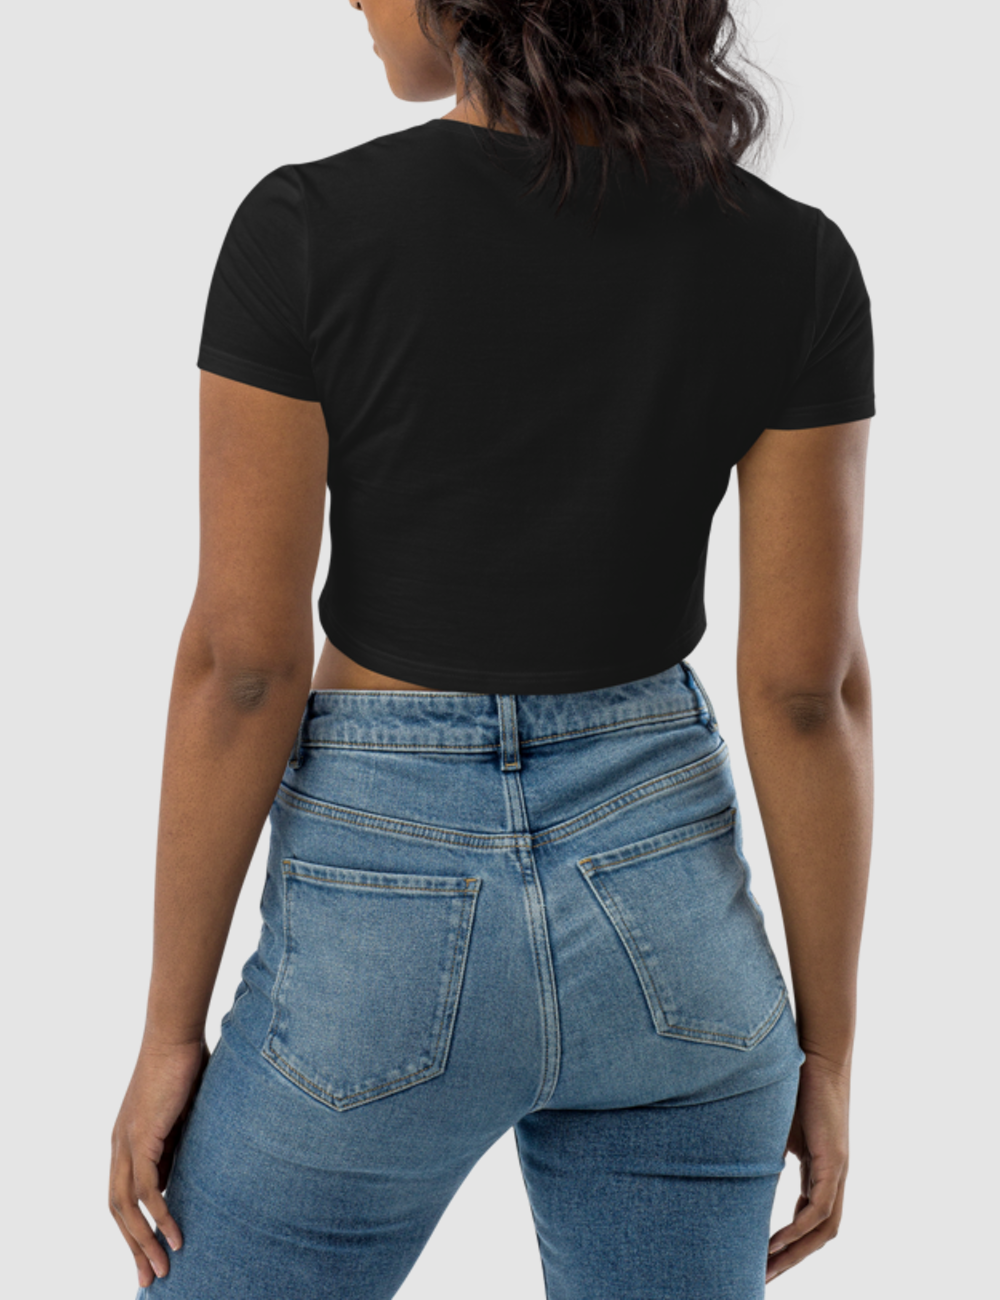 Leave His Texts On Read | Women's Crop Top T-Shirt OniTakai